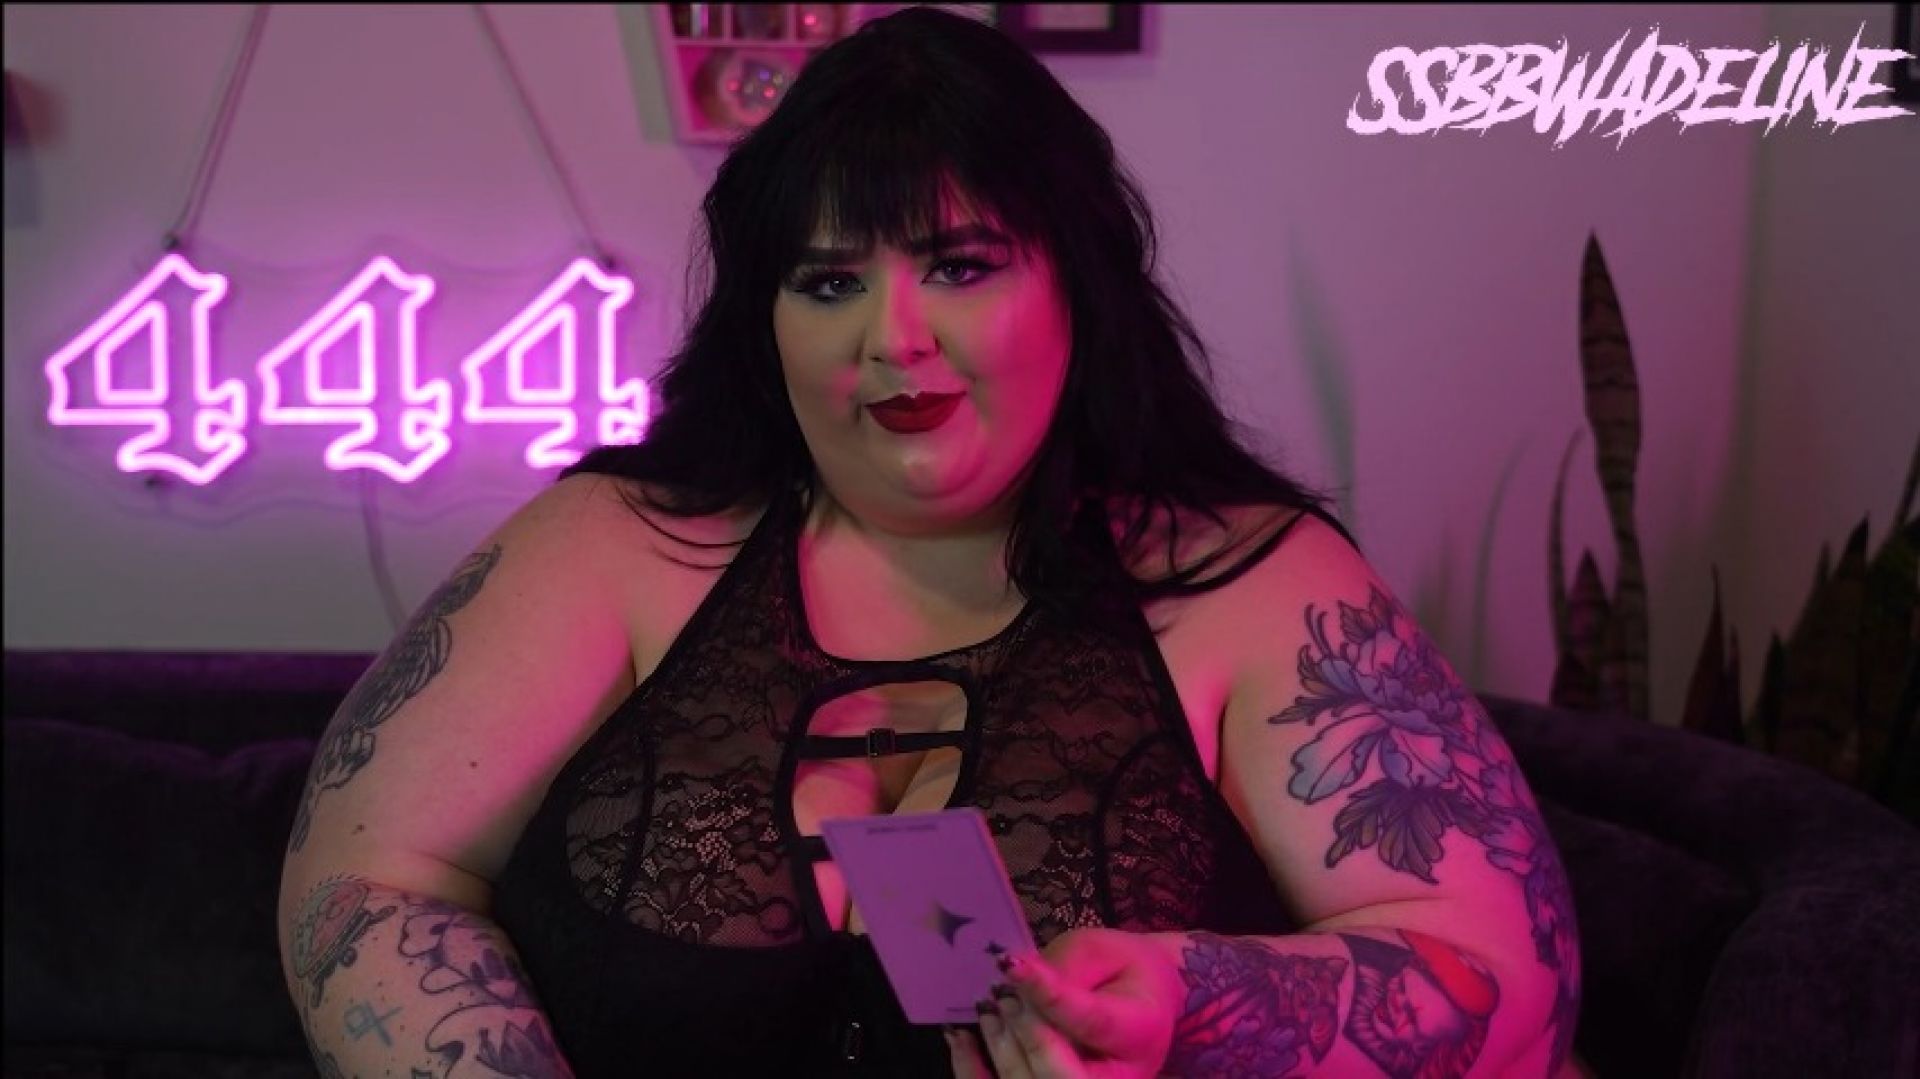 leaked SSBBW Adeline Tells You Your Future - RP video thumbnail